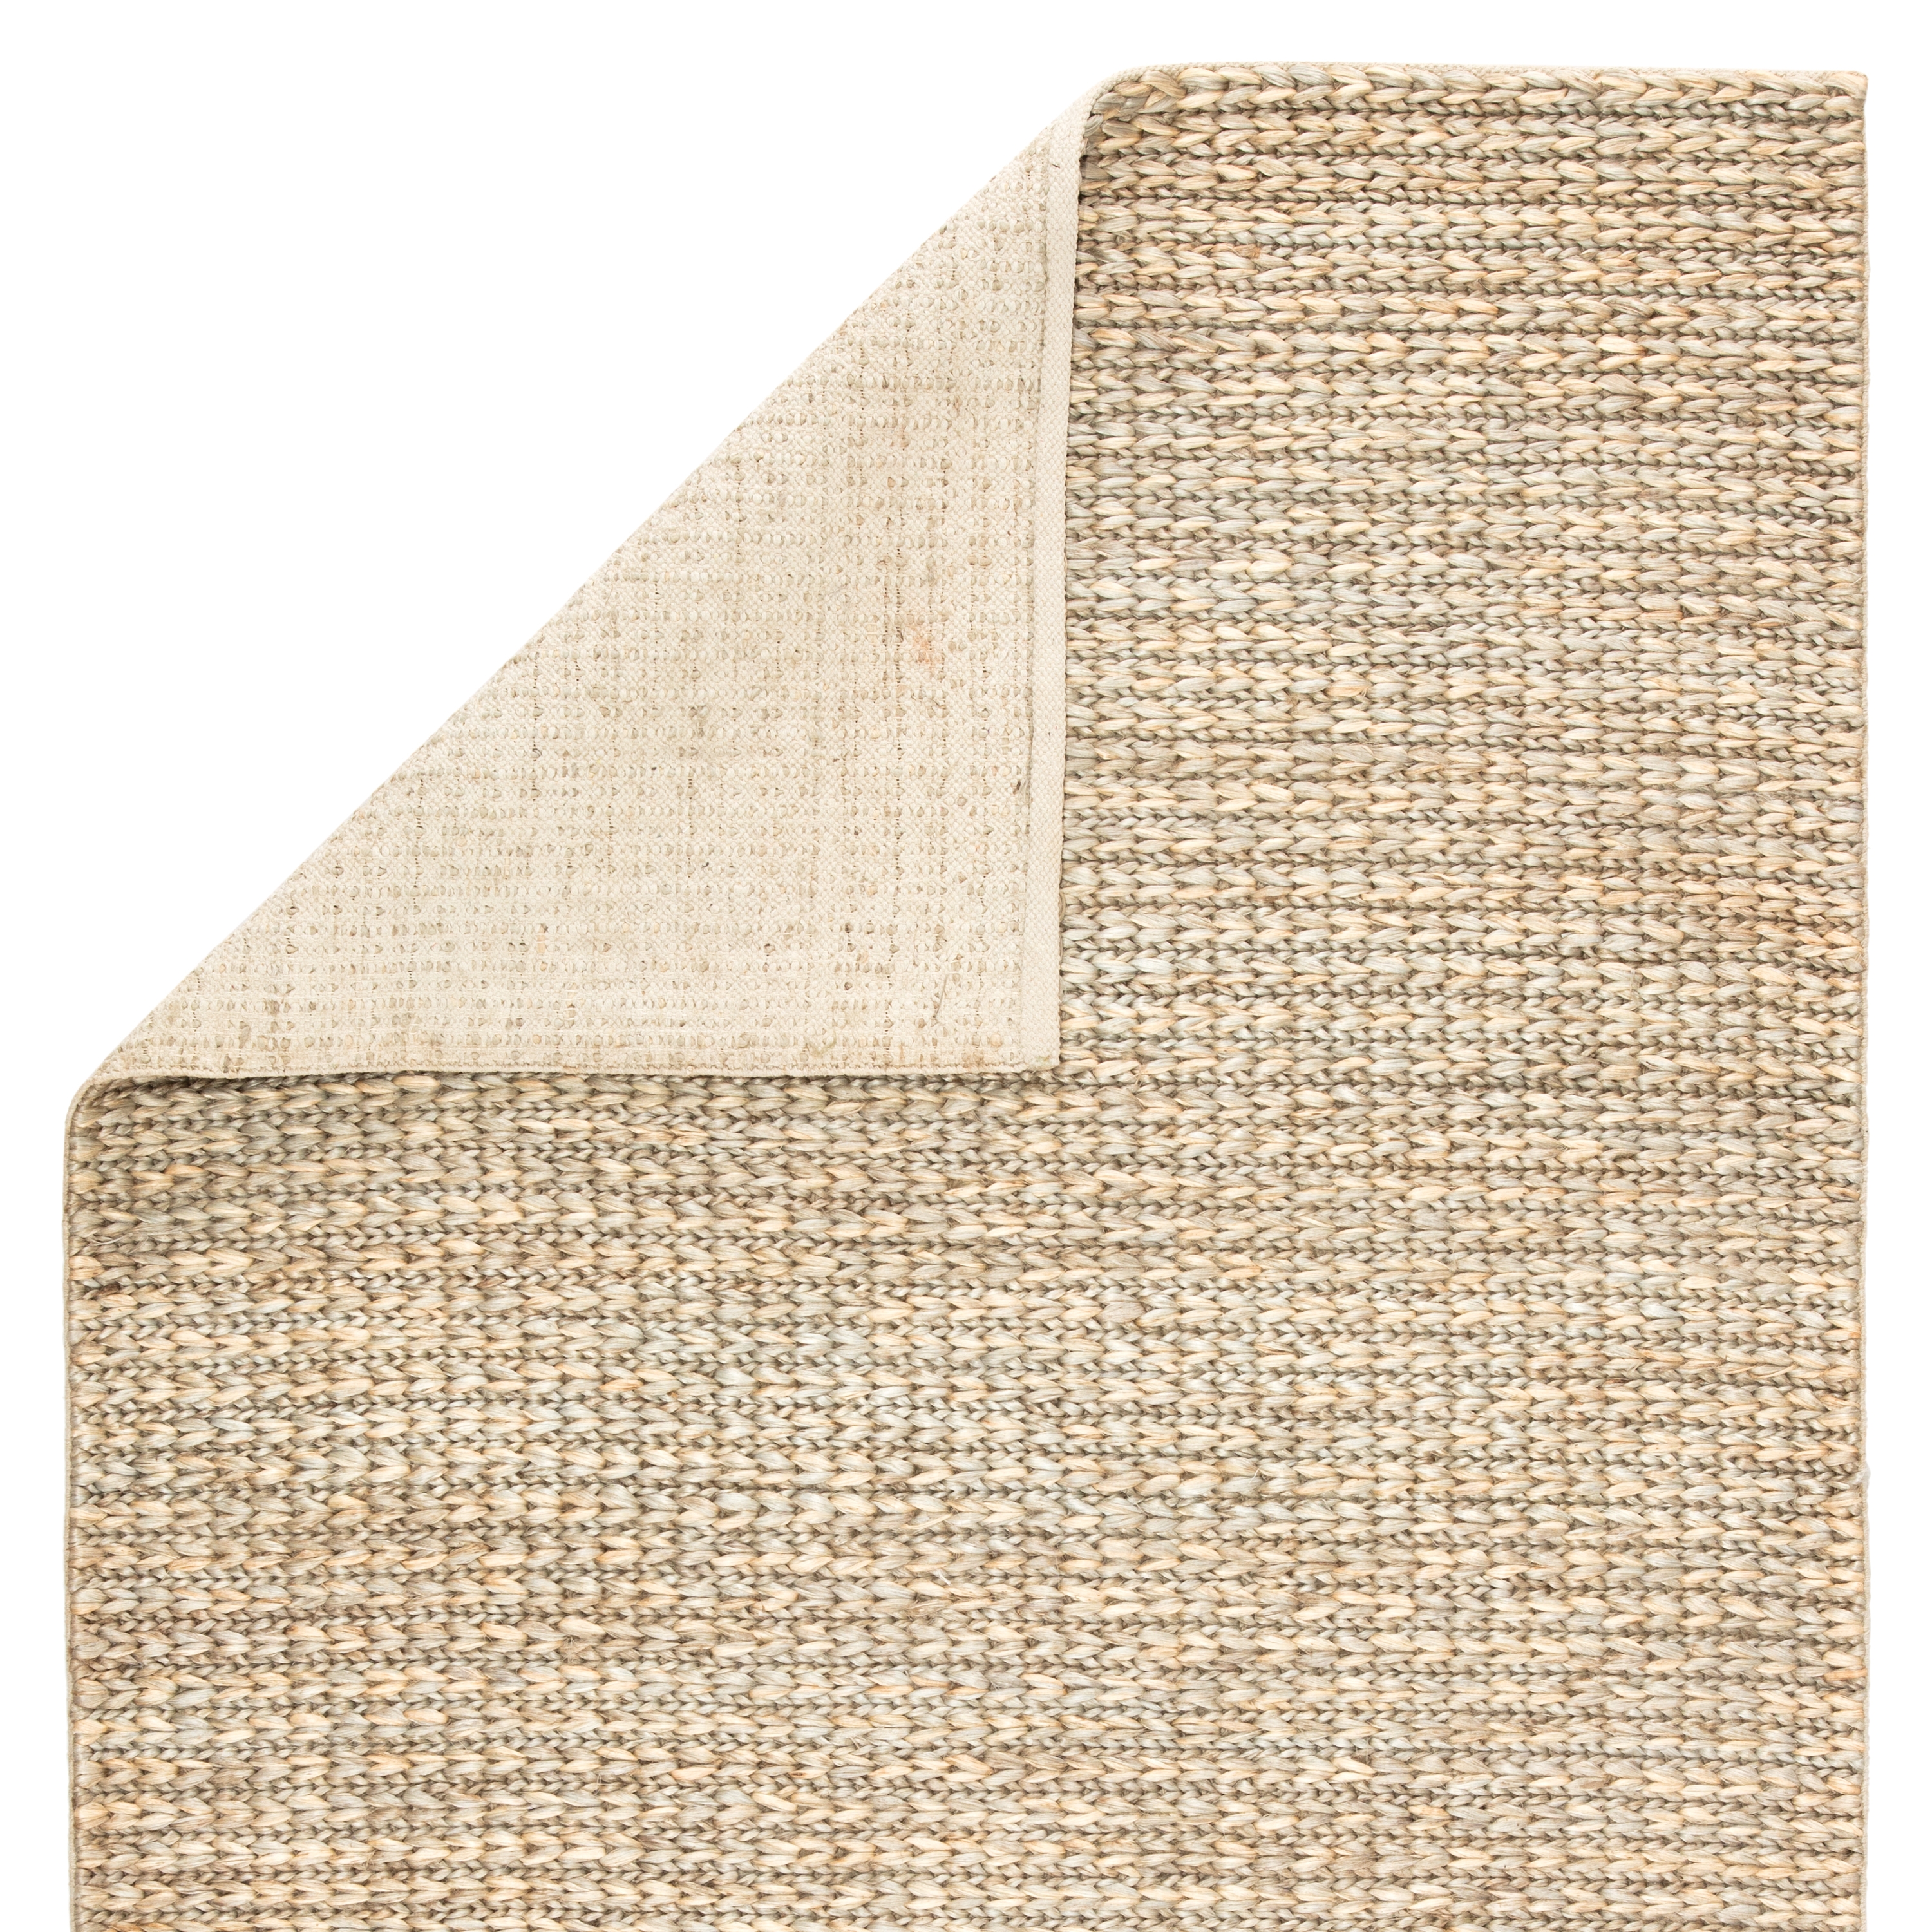 Calista Natural Solid Tan/ Greige Area Rug (8'X10') - Image 2